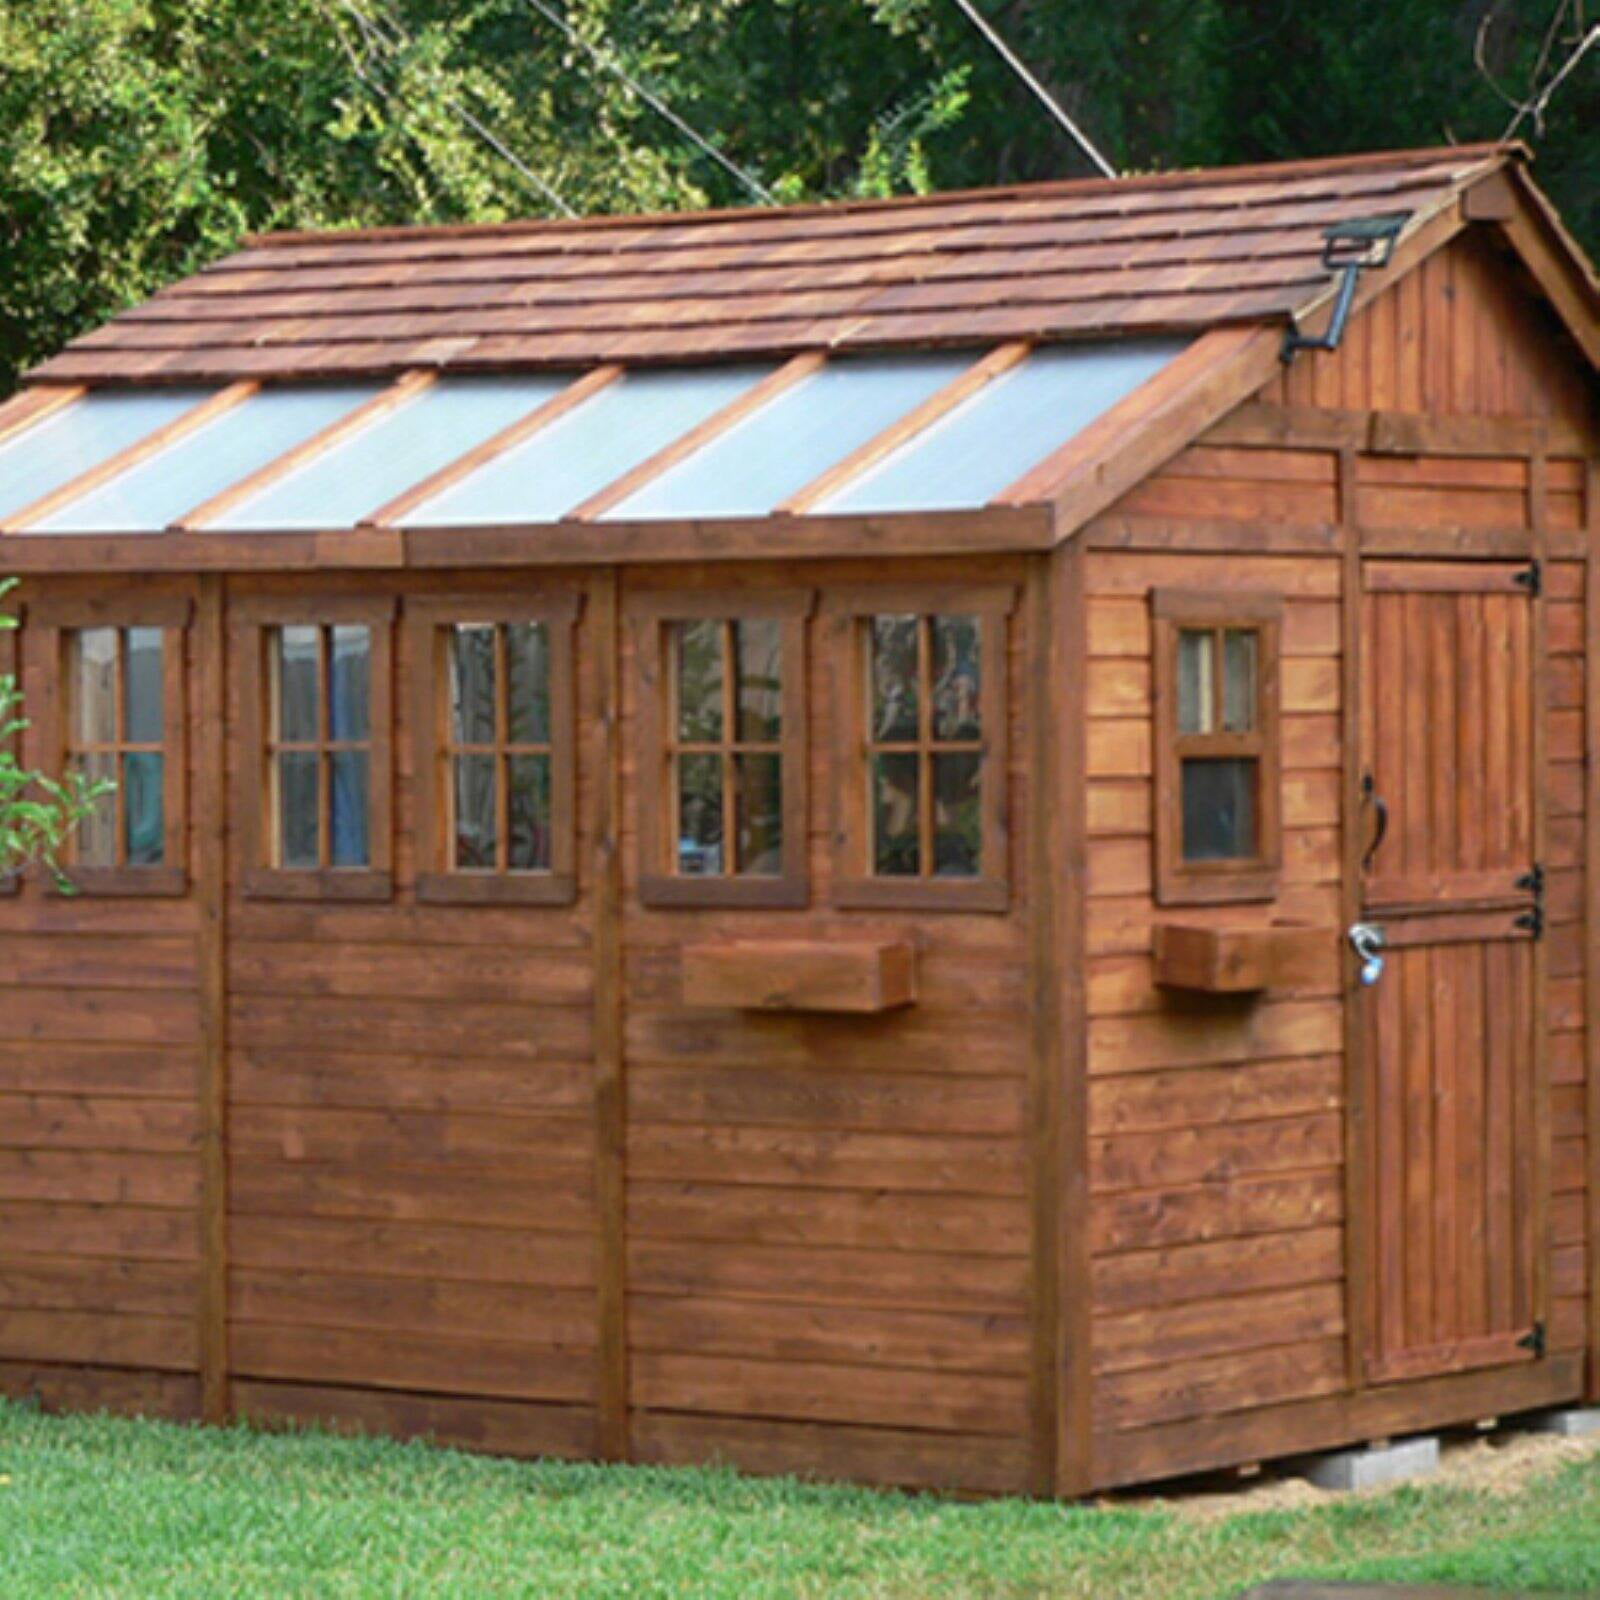 Outdoor Living Today SSGS812 Sunshed 8 x 12 ft. Garden Shed - Walmart